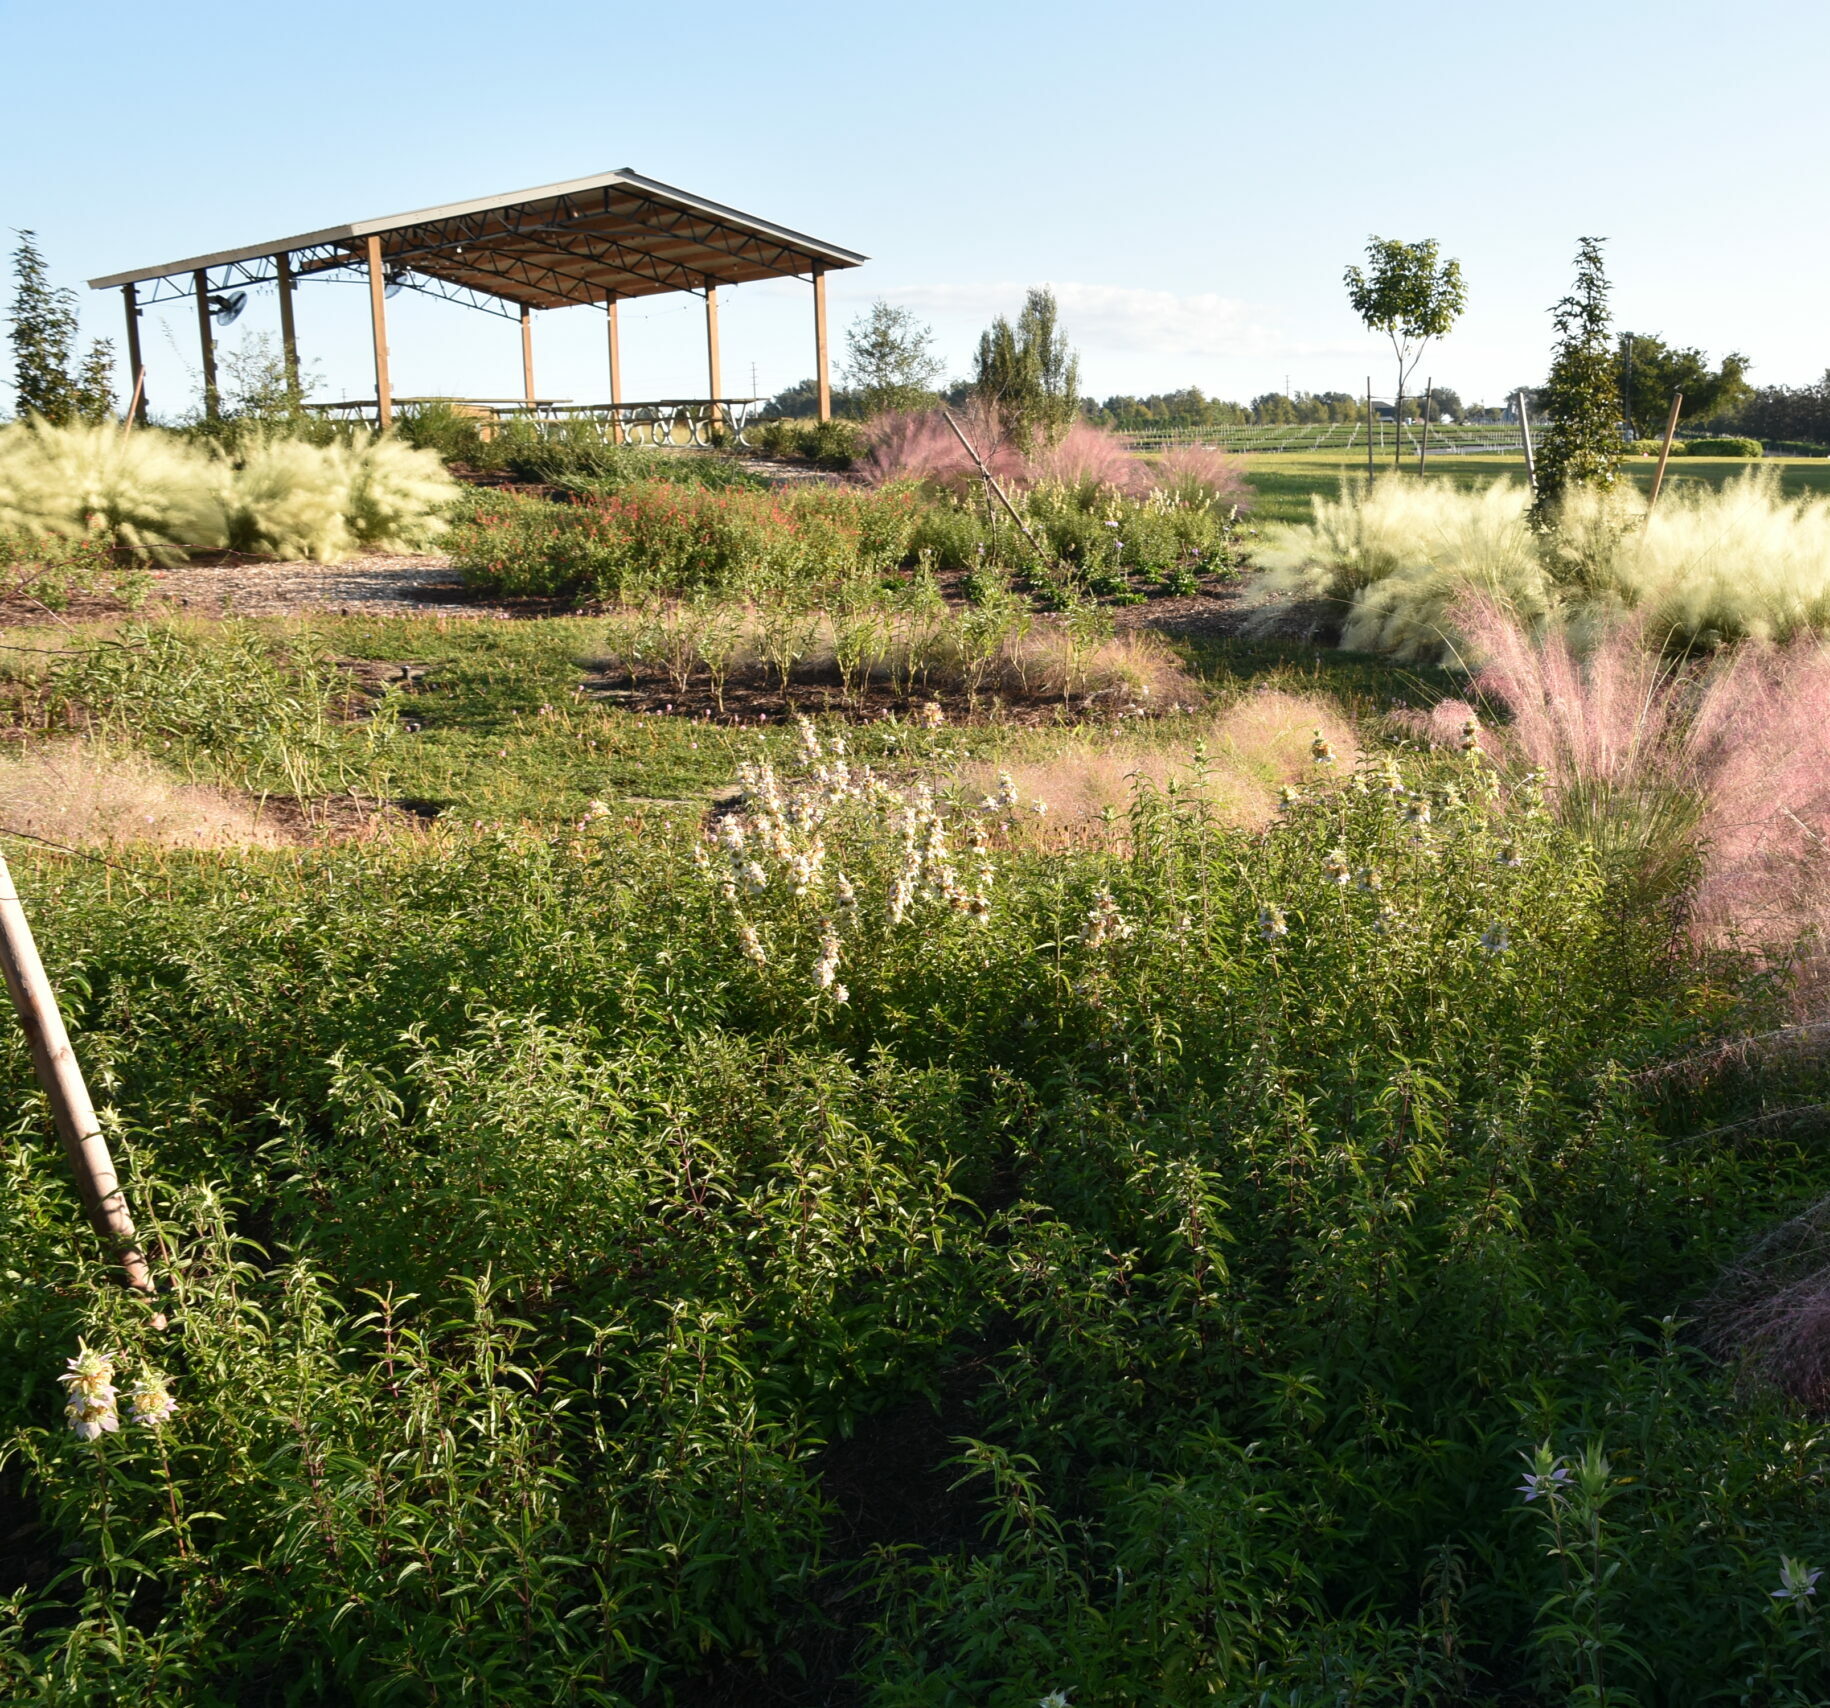 Guests will get to explore Cherrylake’s native pollinator garden during the Farm Days events